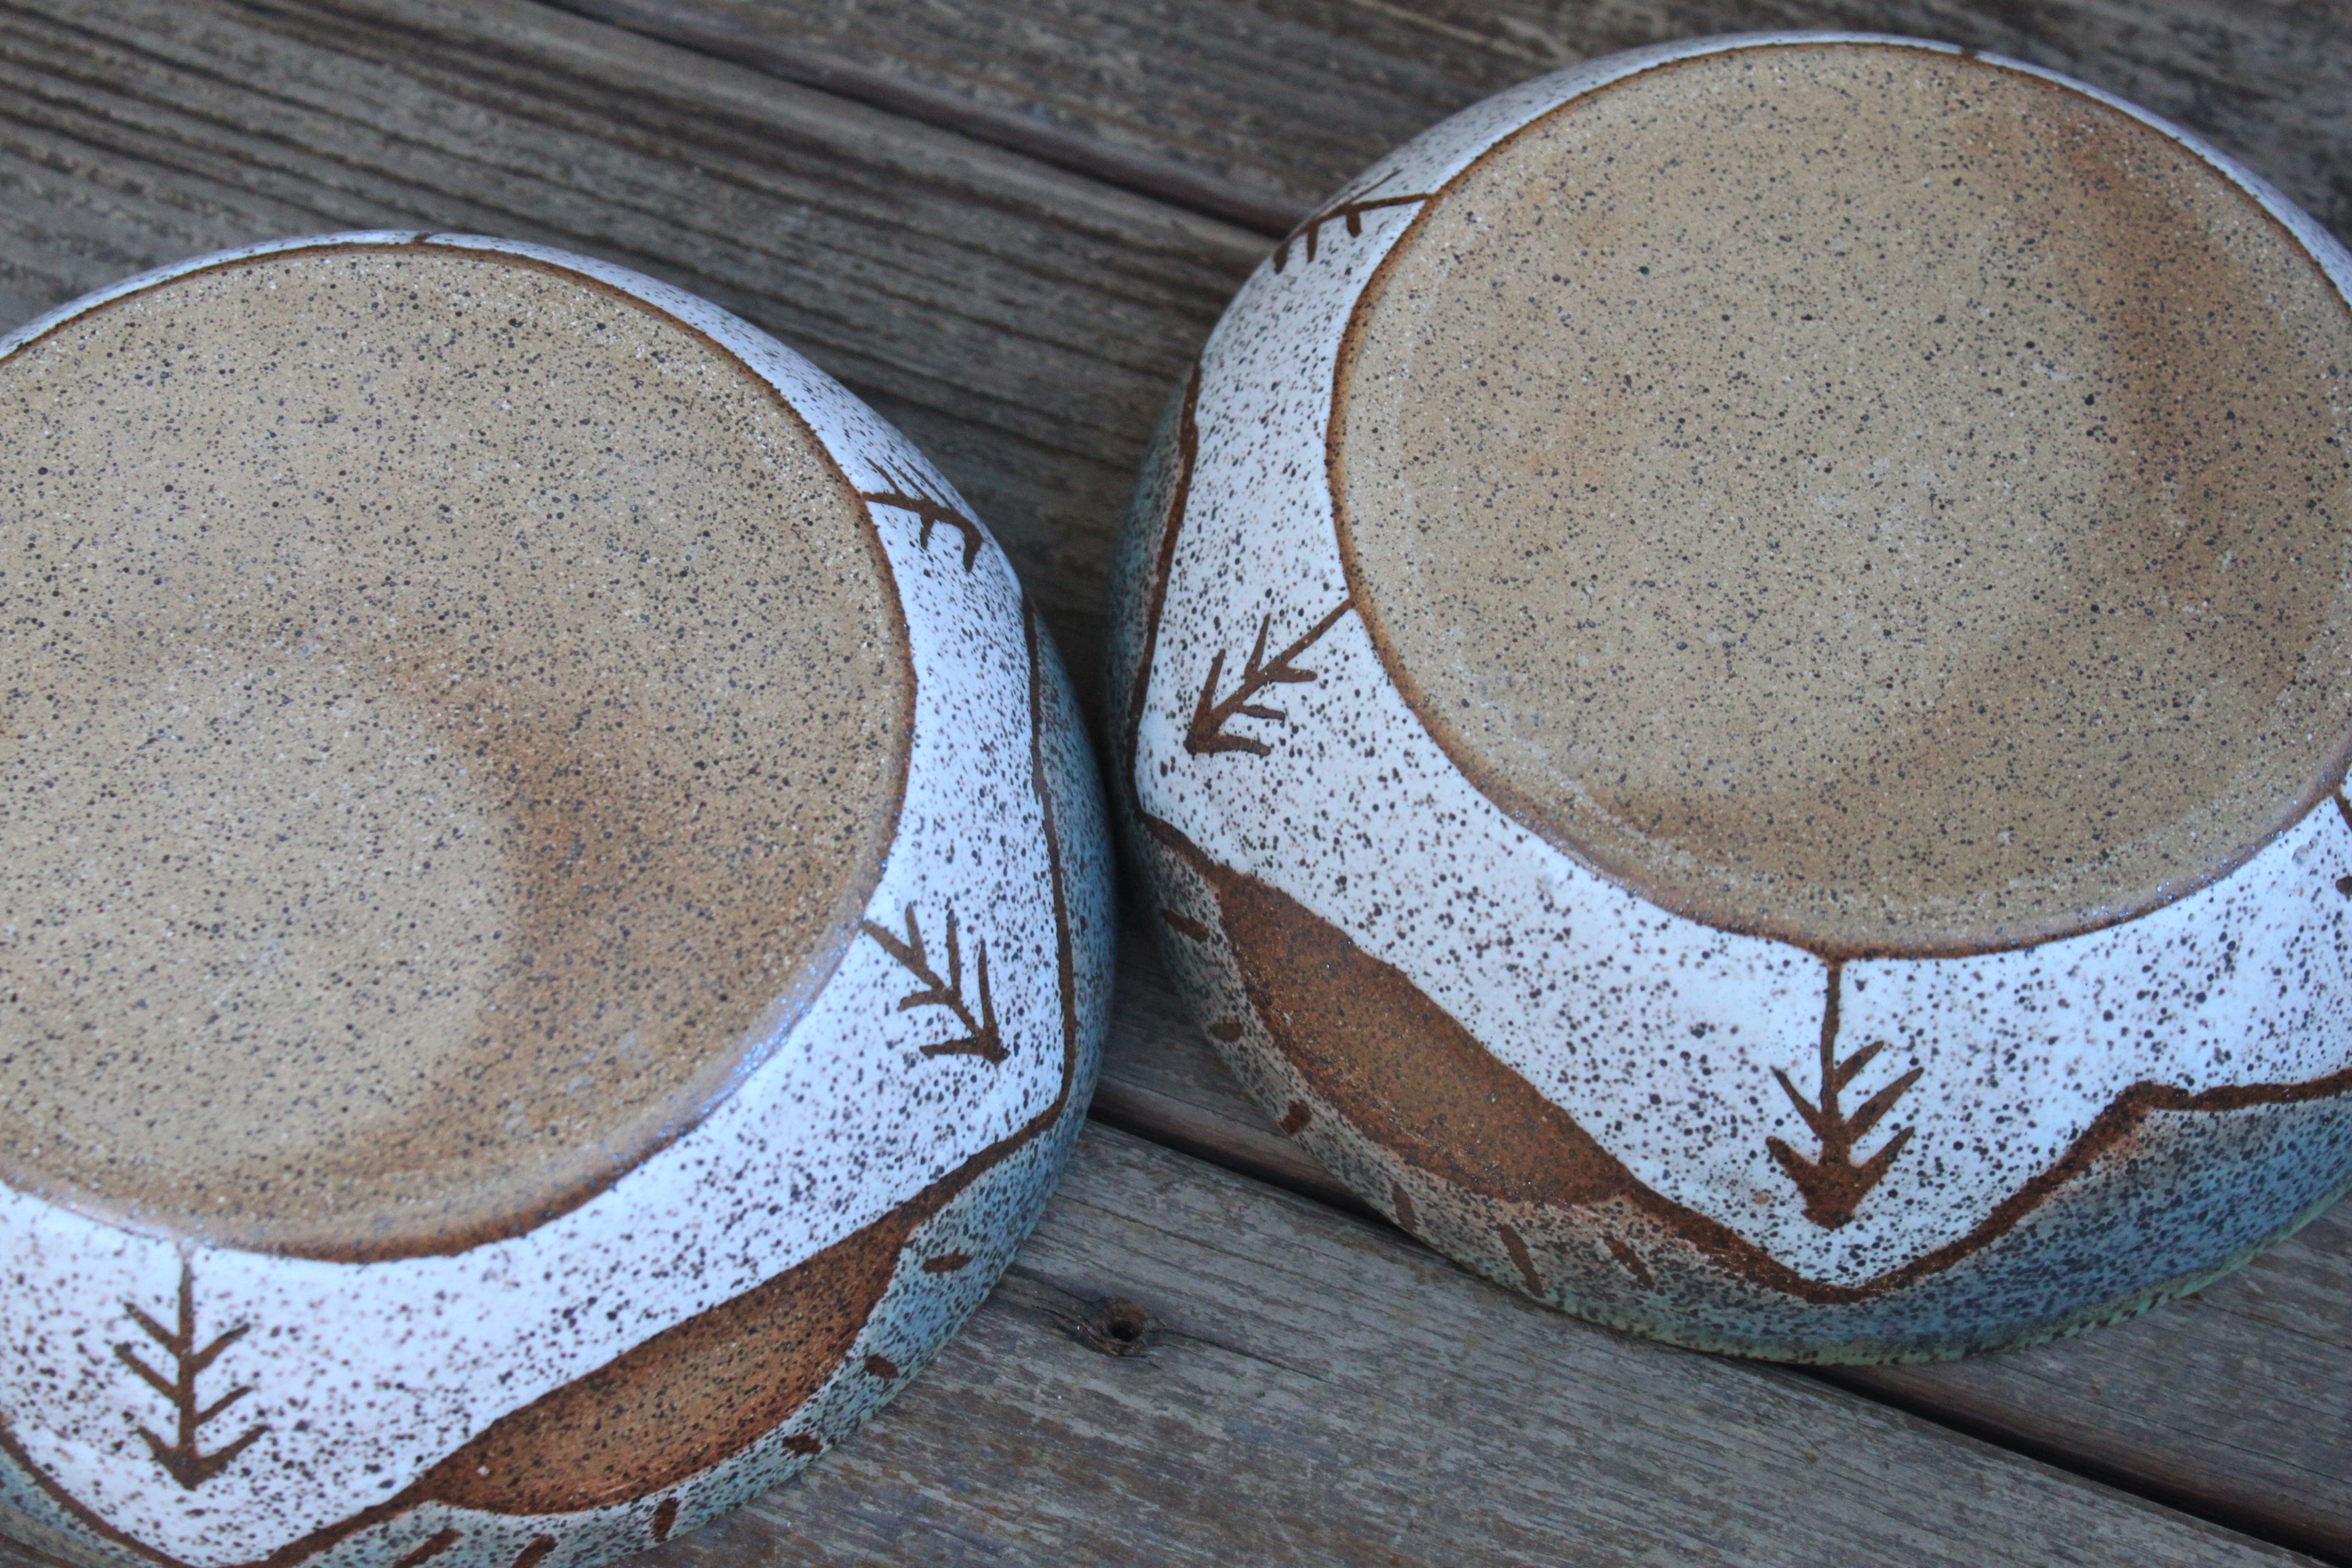 Snowy High Peaks Sunset Plate Bowls - sold separately